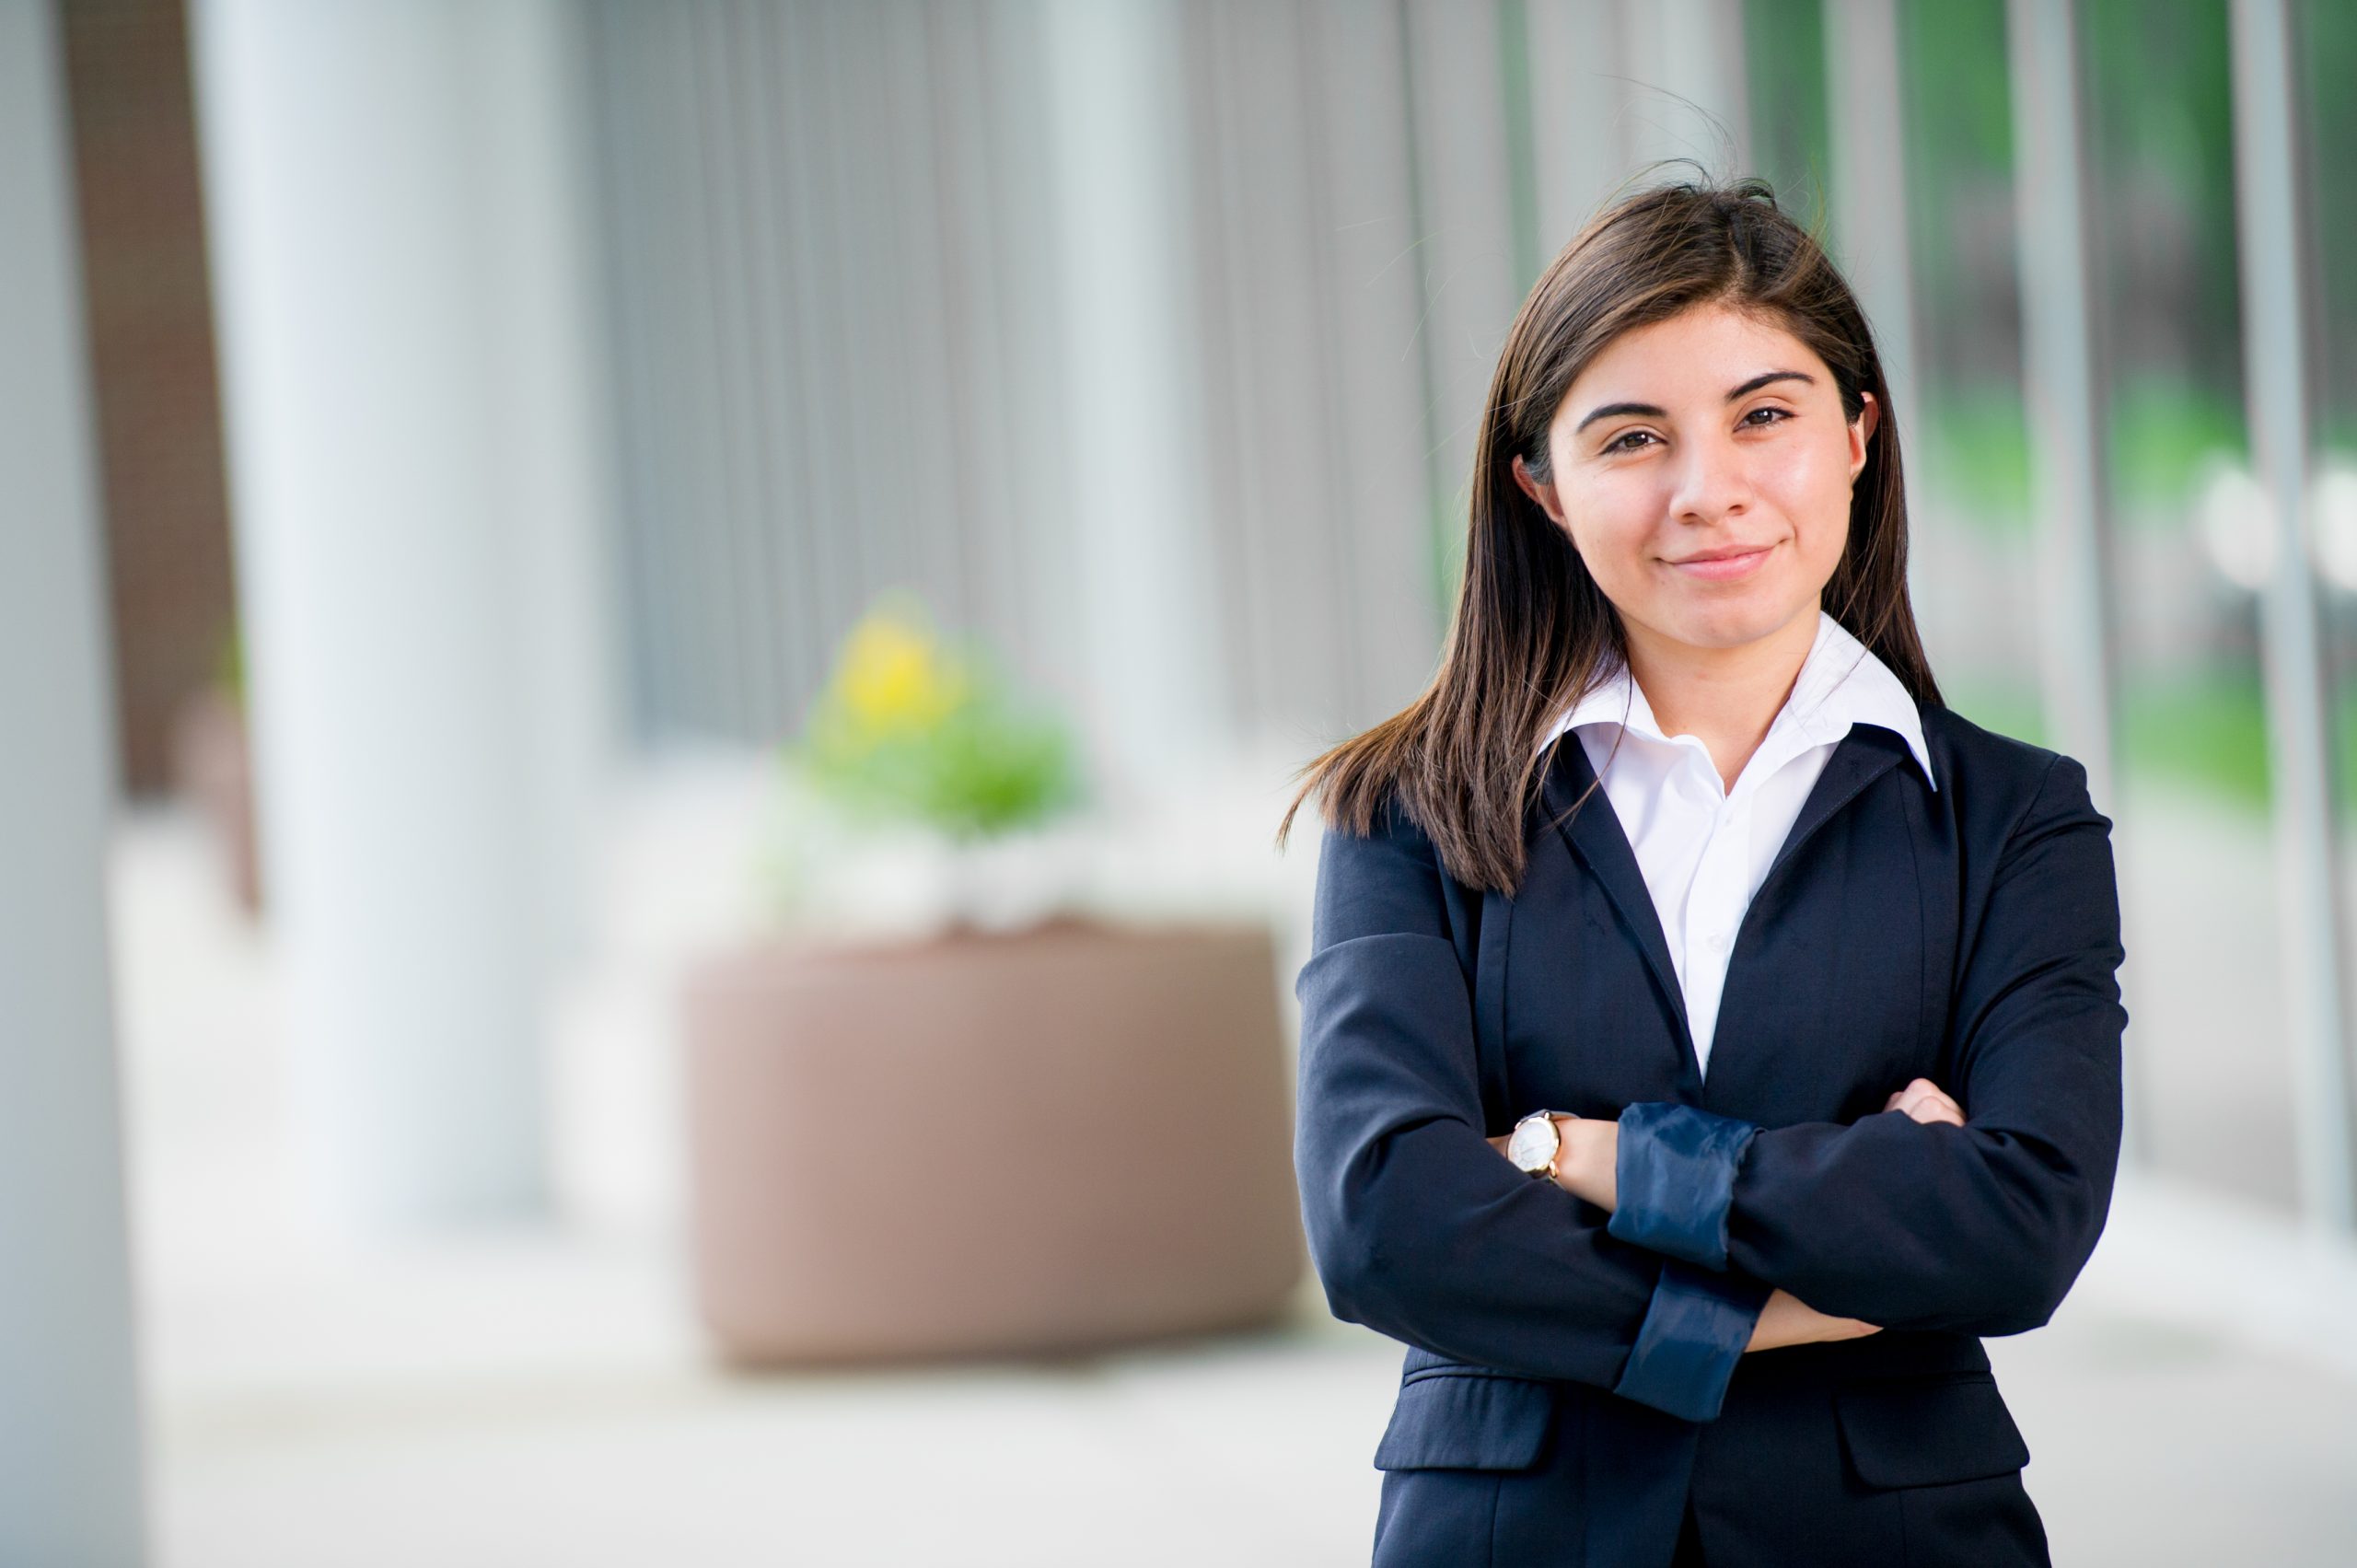 A female in a business suit posing.